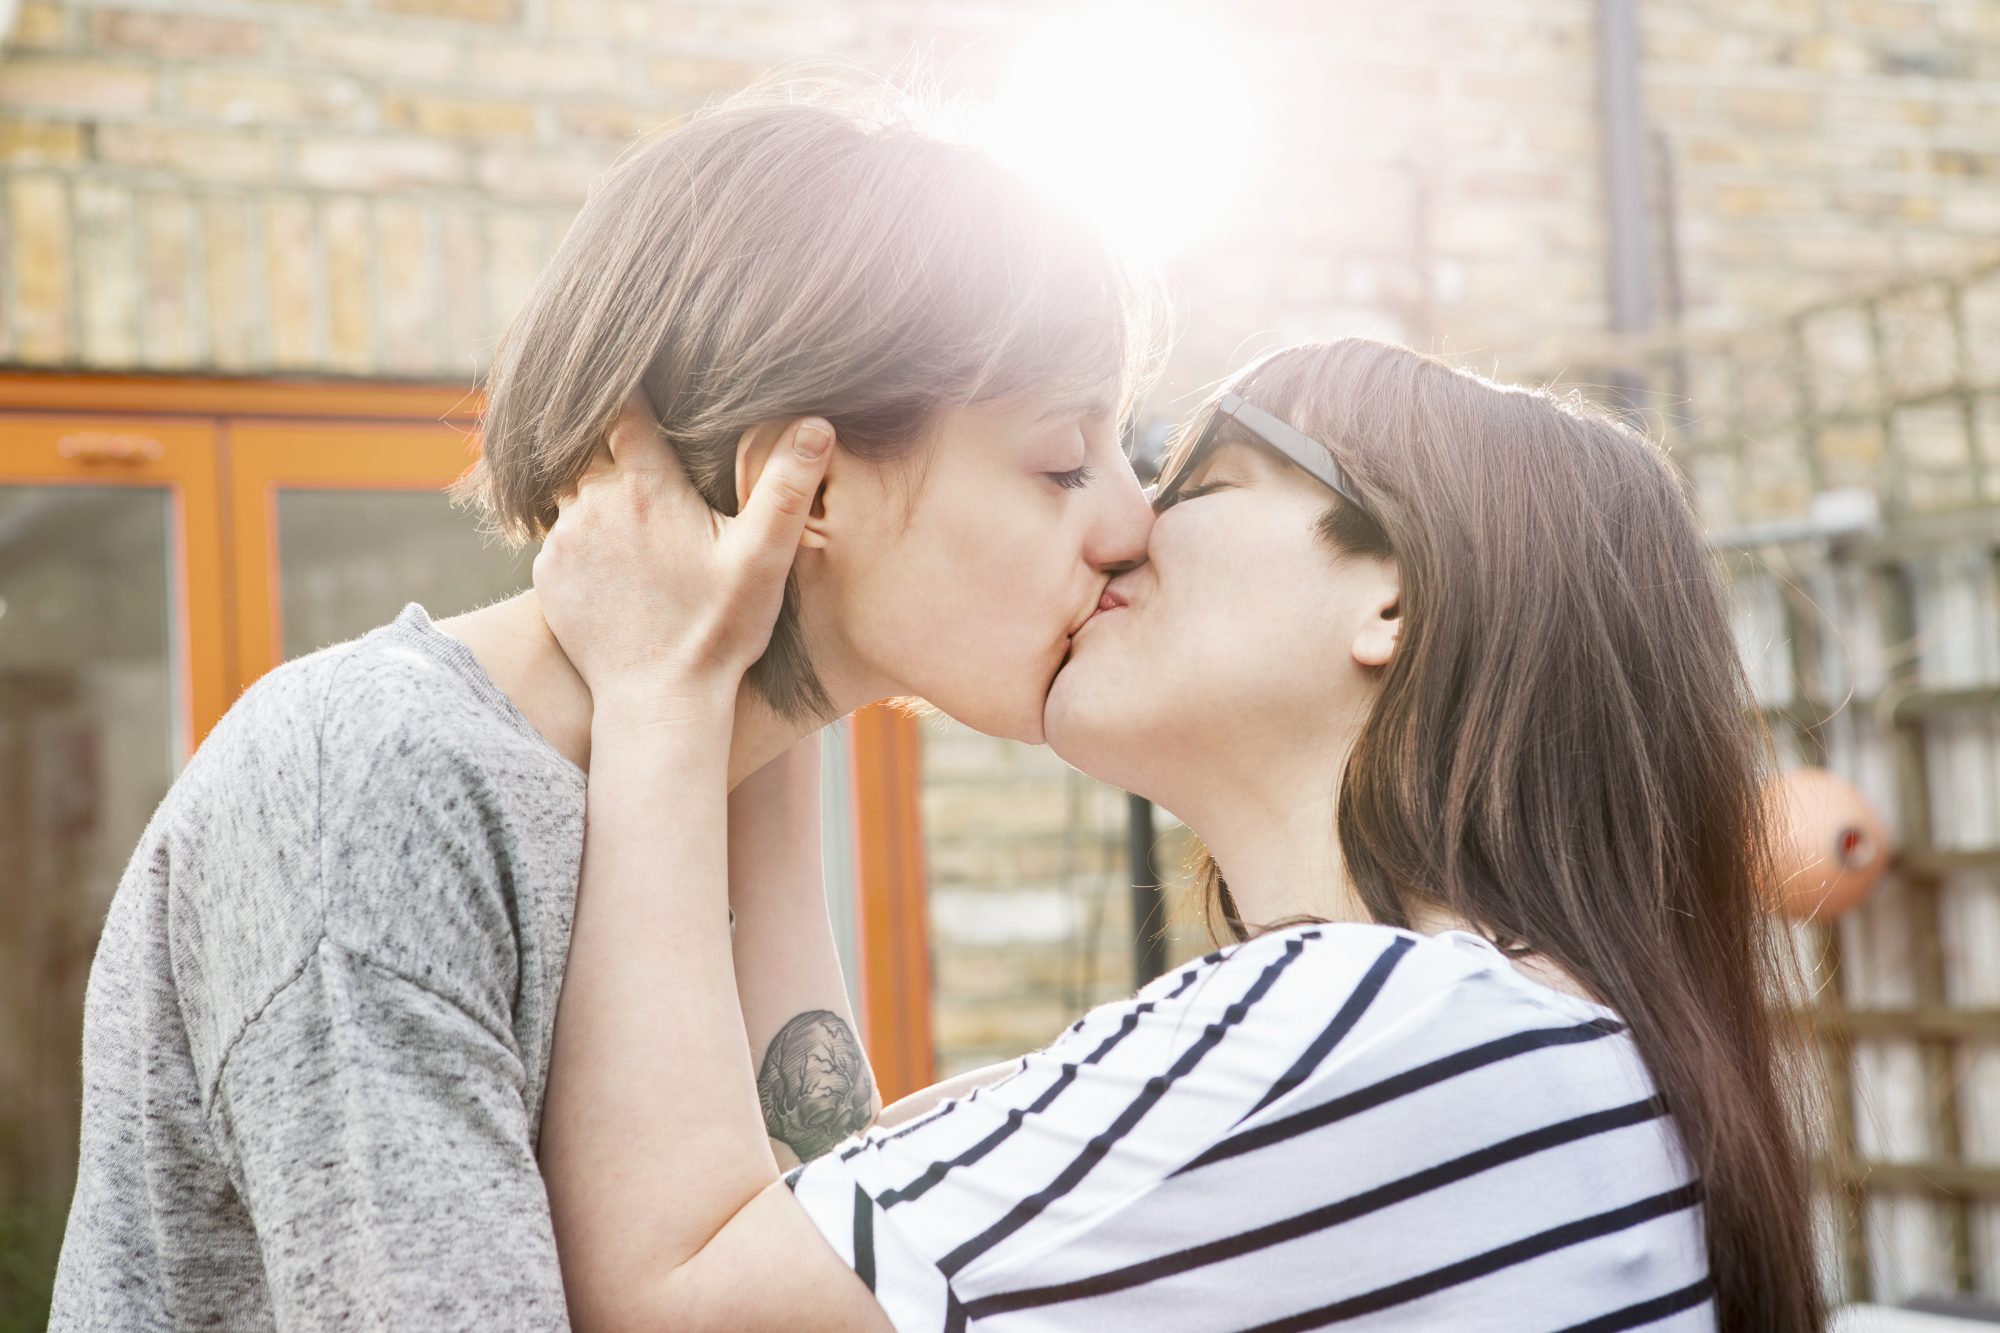 7 myths about kissing you should know before your next make-out session